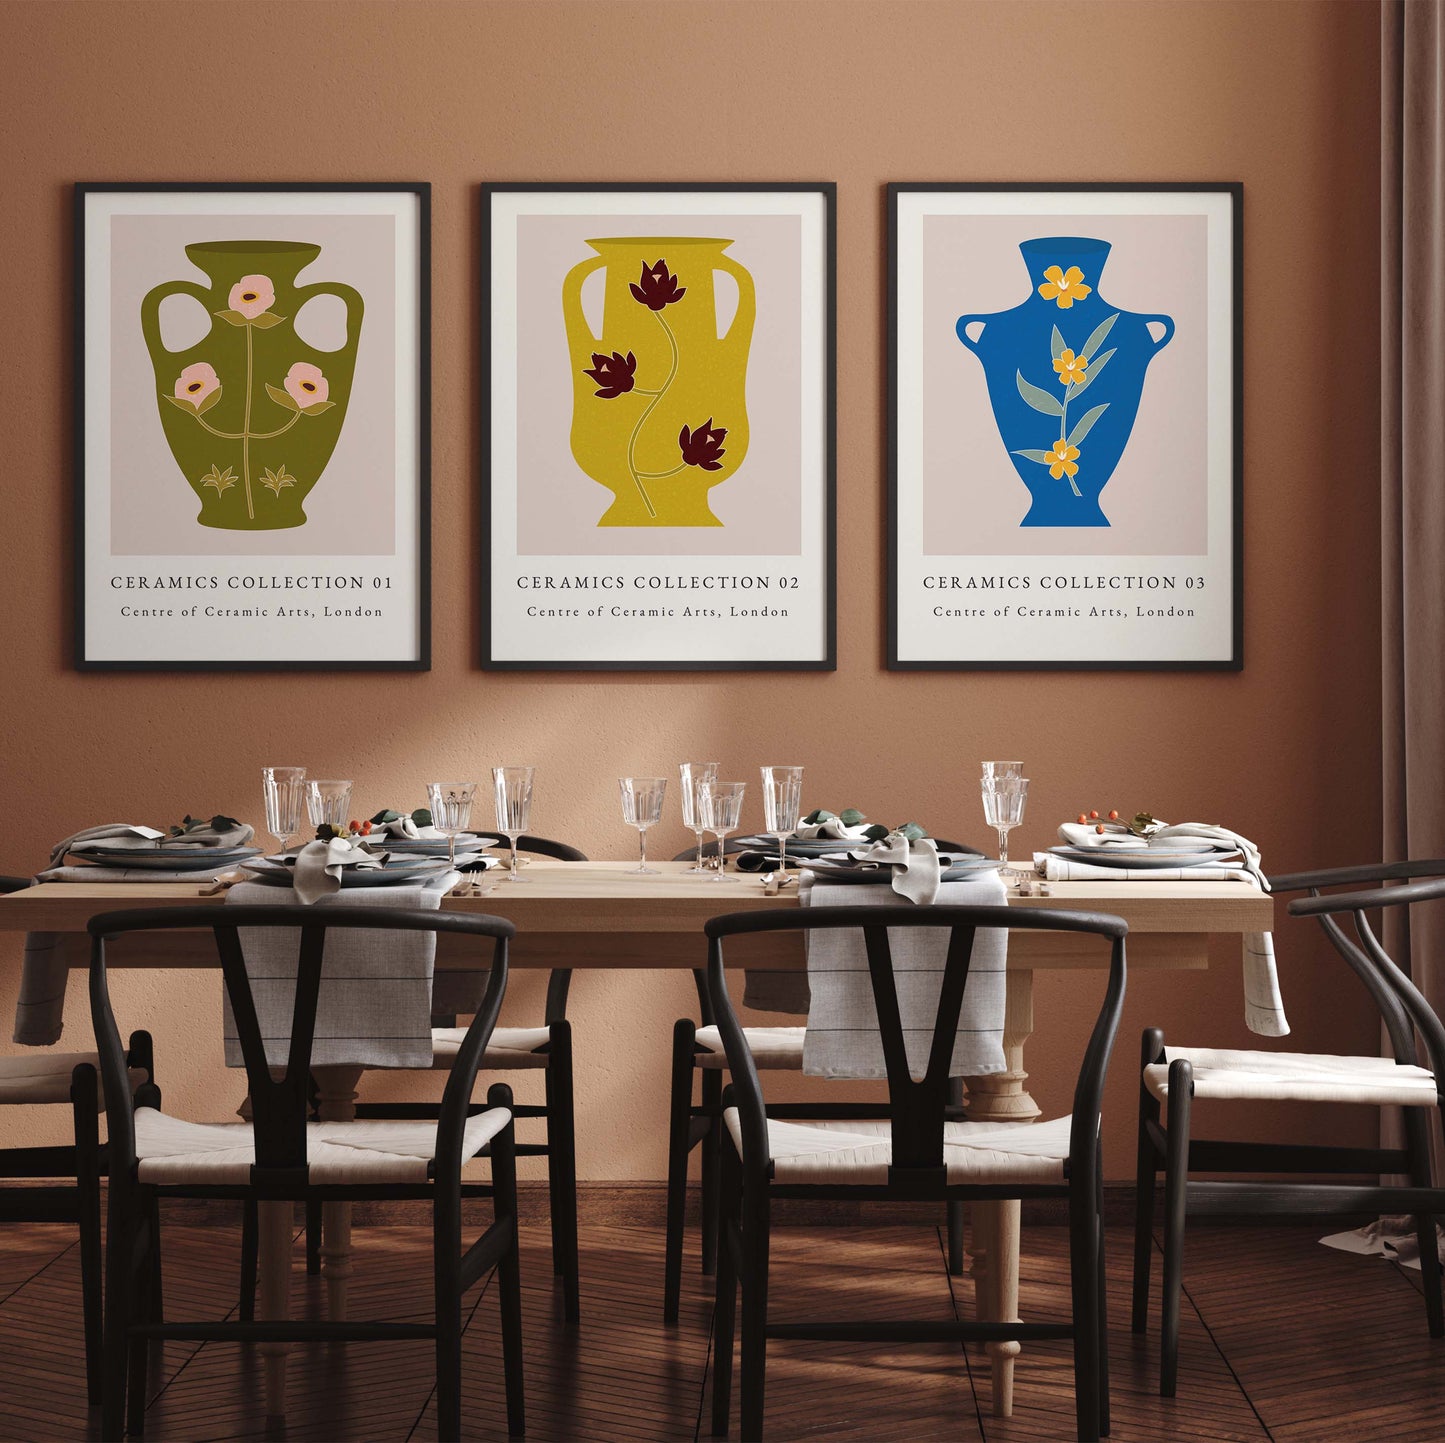 Set of ceramic vase prints in blue, yellow and green